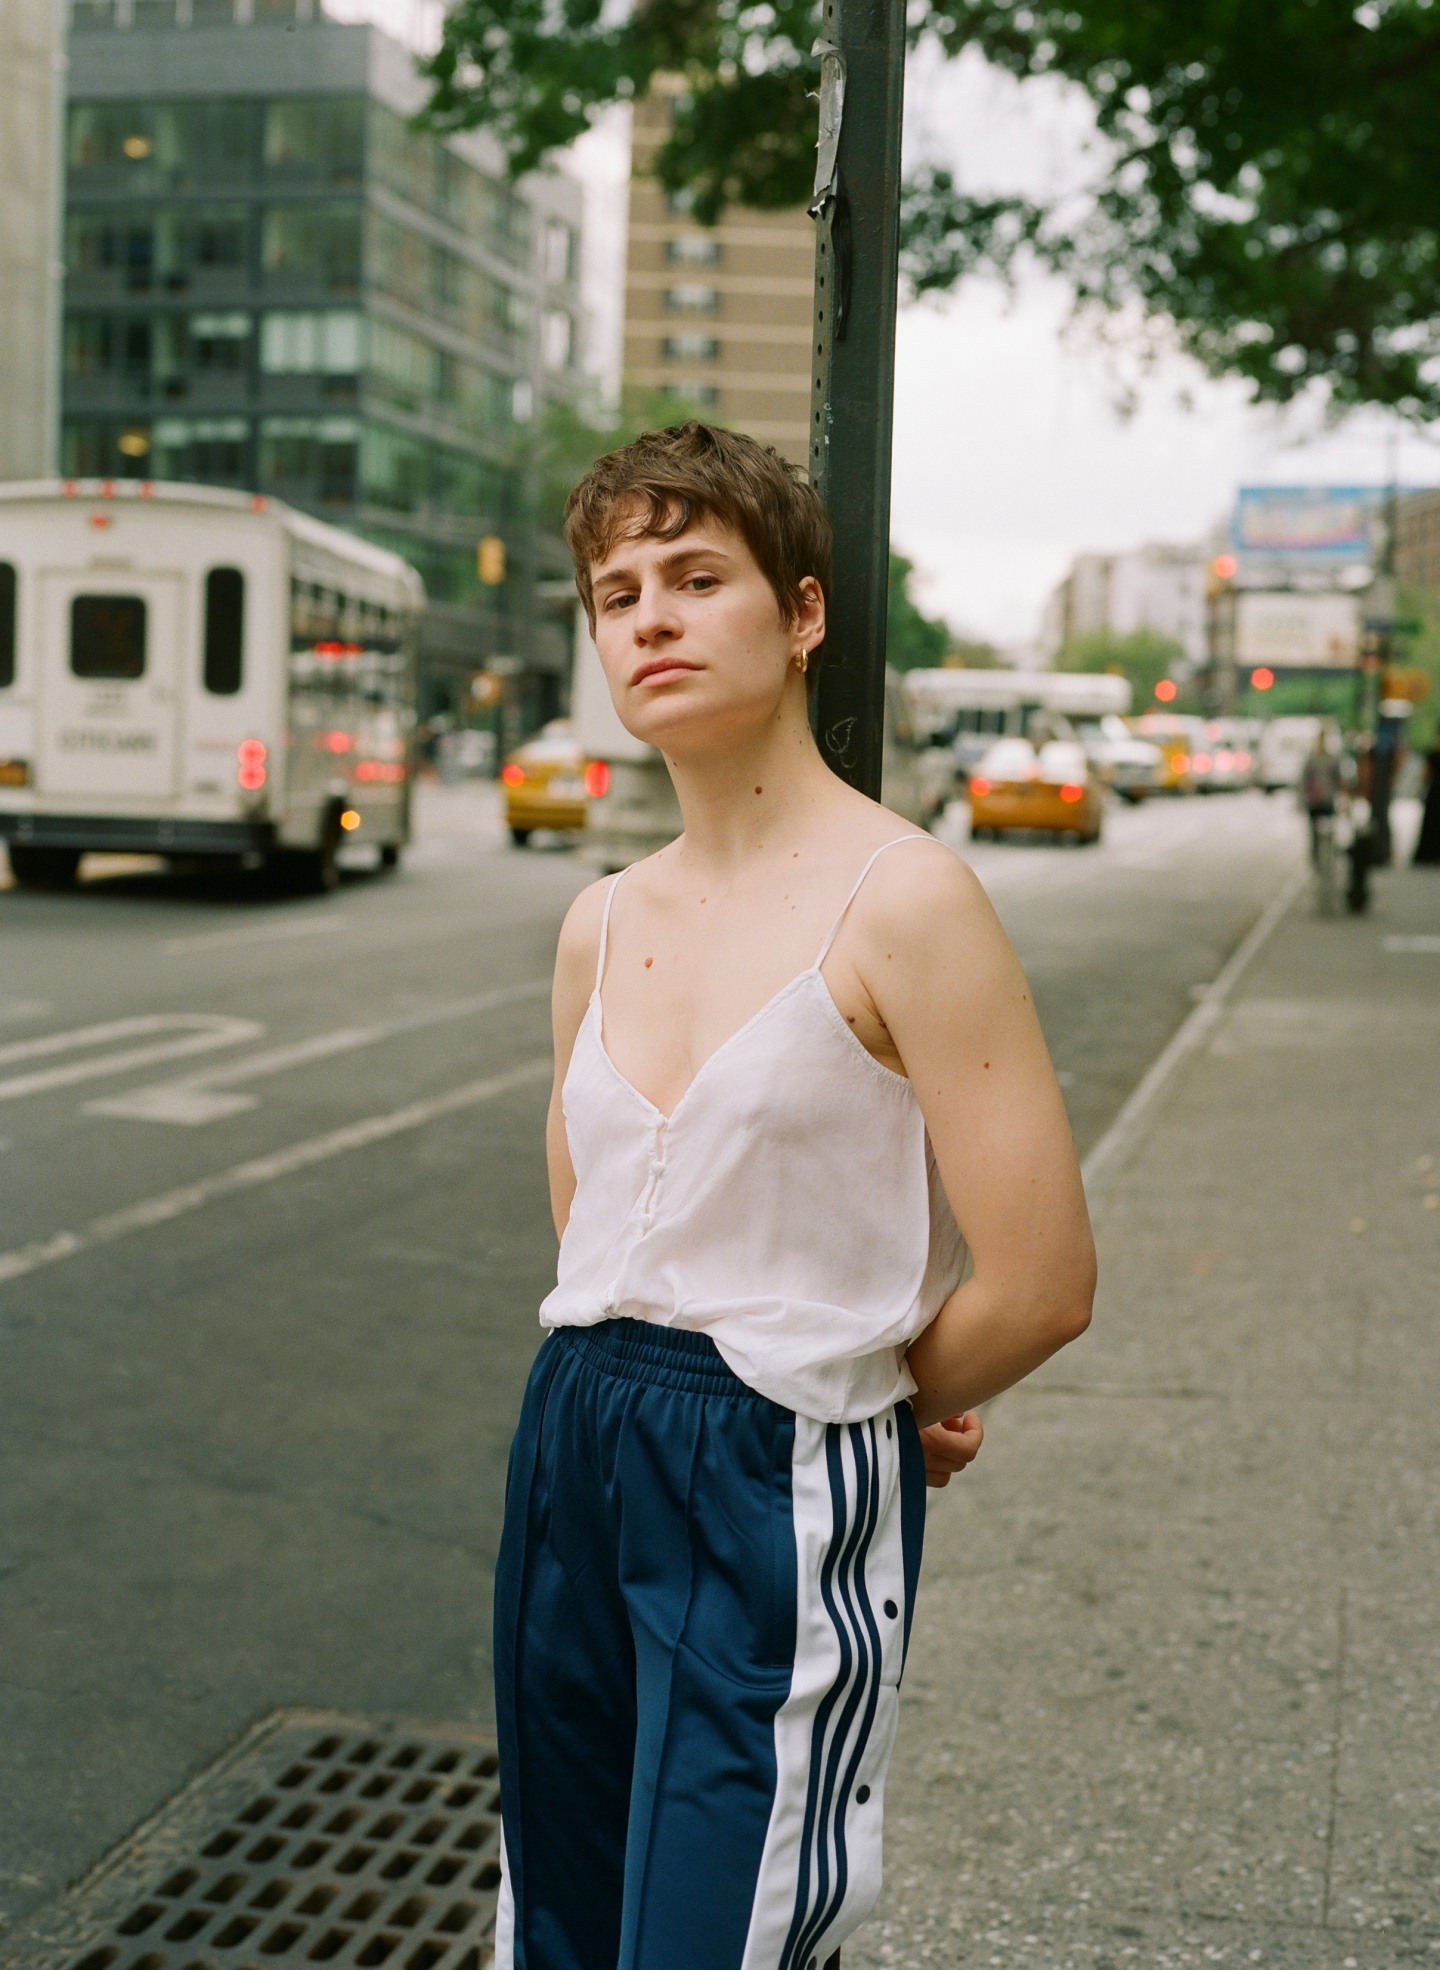 Christine and the Queens isn’t afraid to be too much